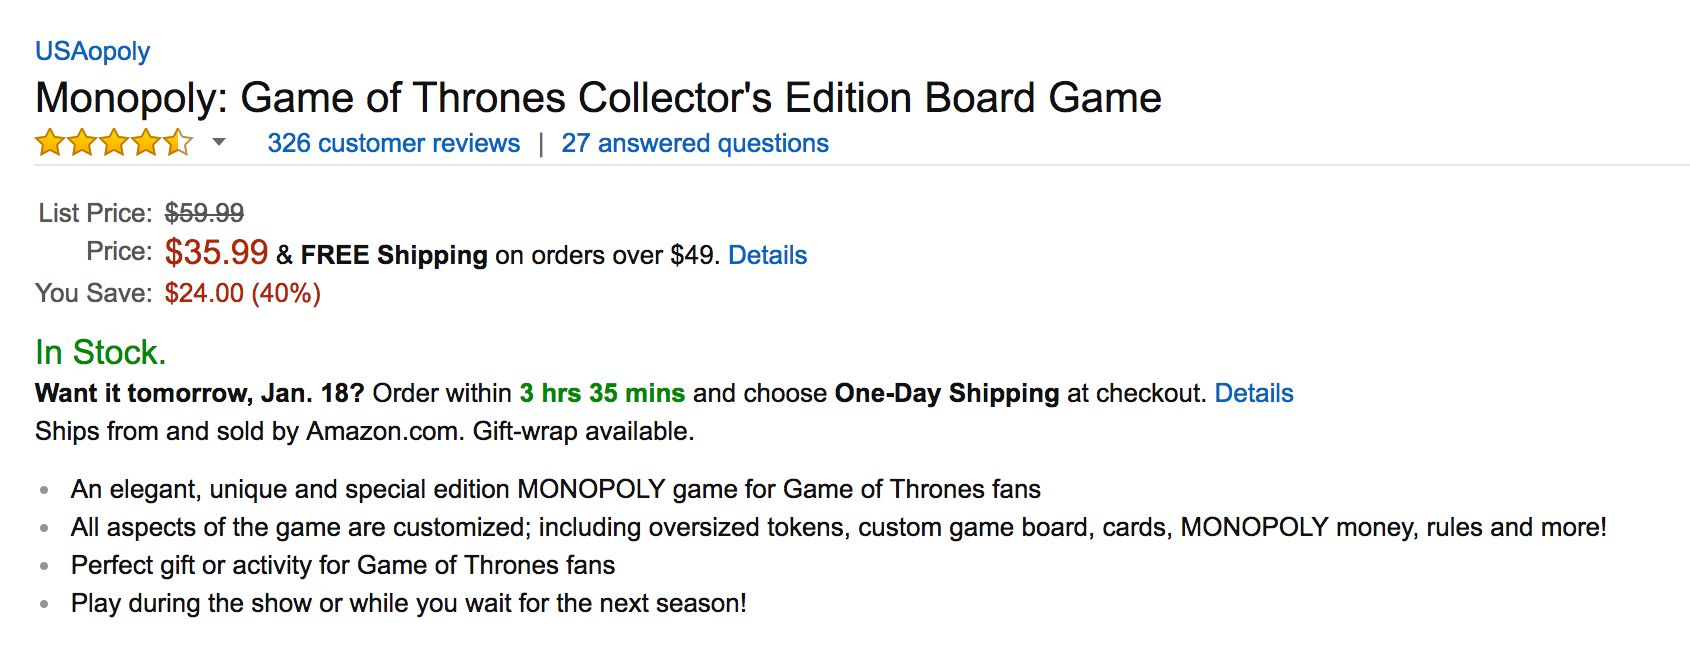 monopoly-game-of-thrones-collectors-edition-board-game-4